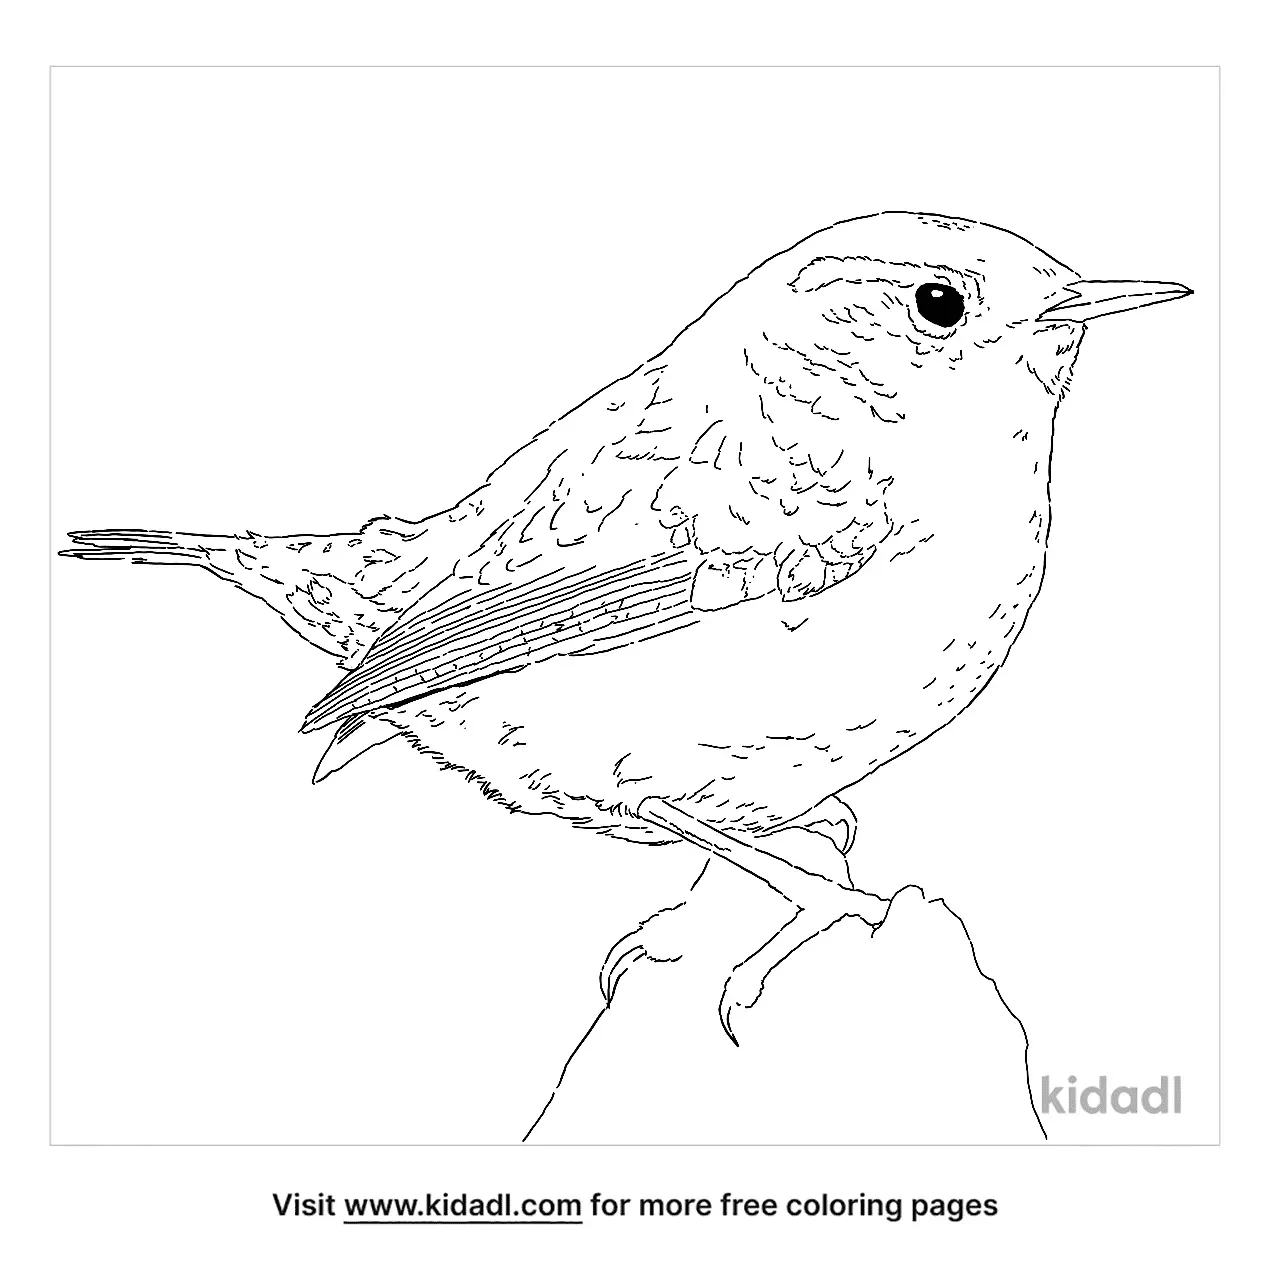 Waxwing Coloring Page | Free Birds Coloring Page | Kidadl